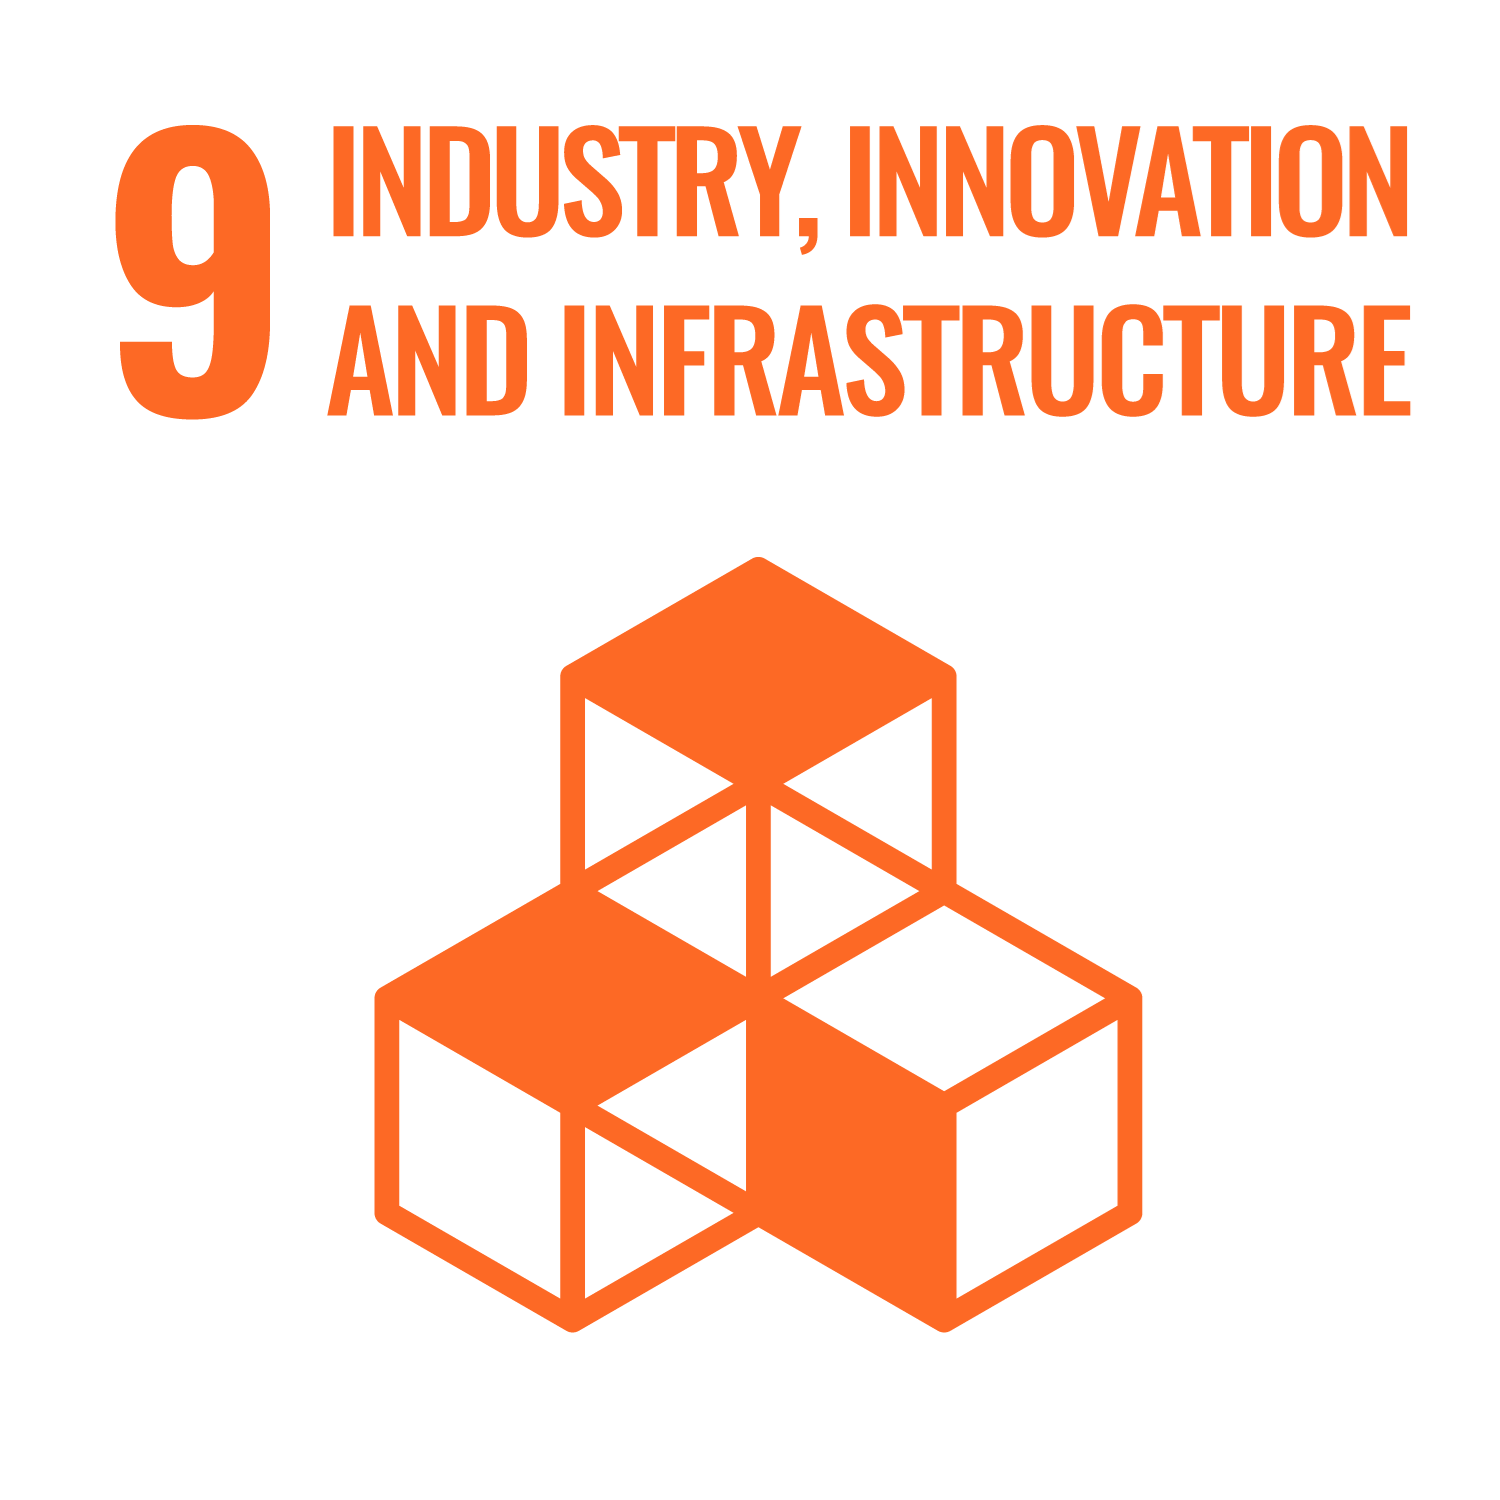 SDG Goal 9: Industry, innovation and infrastructure